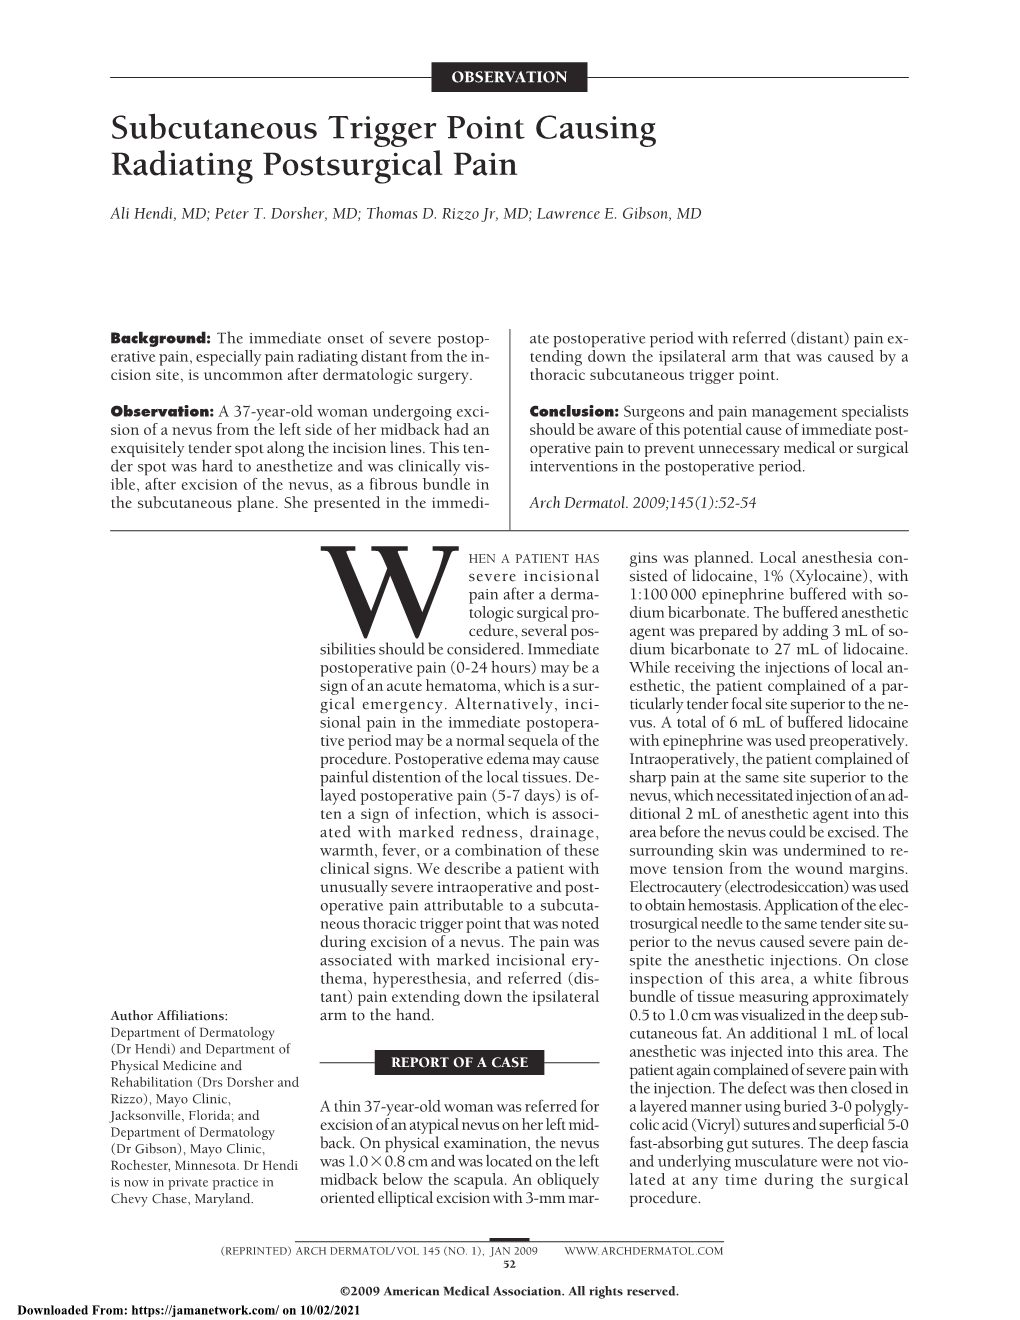 Subcutaneous Trigger Point Causing Radiating Postsurgical Pain